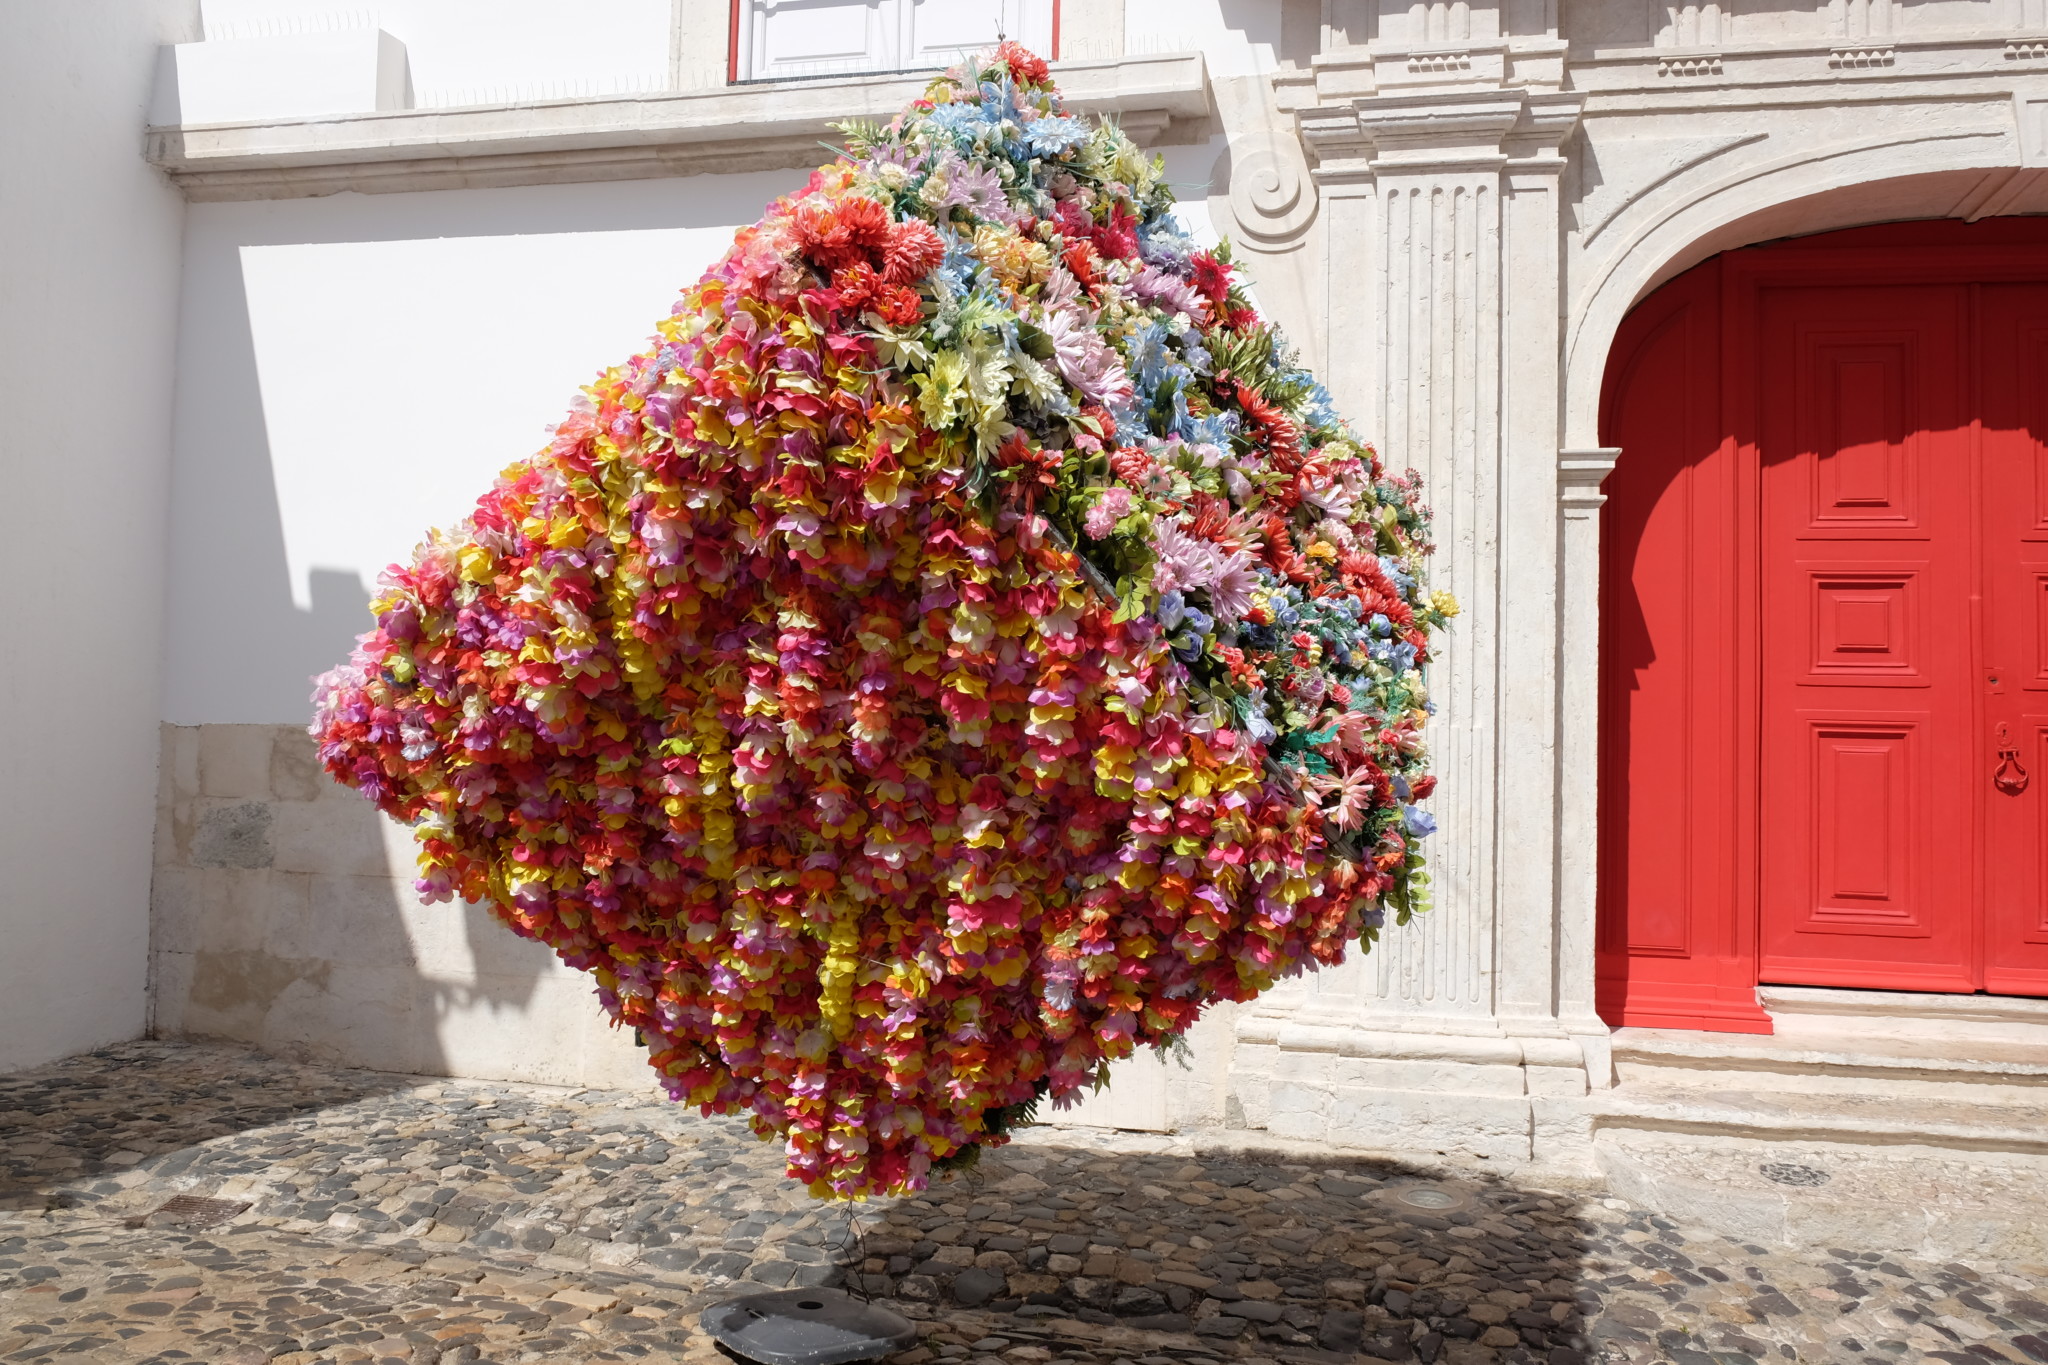 A gorgeous floral art installation in a courtyard near the Castle